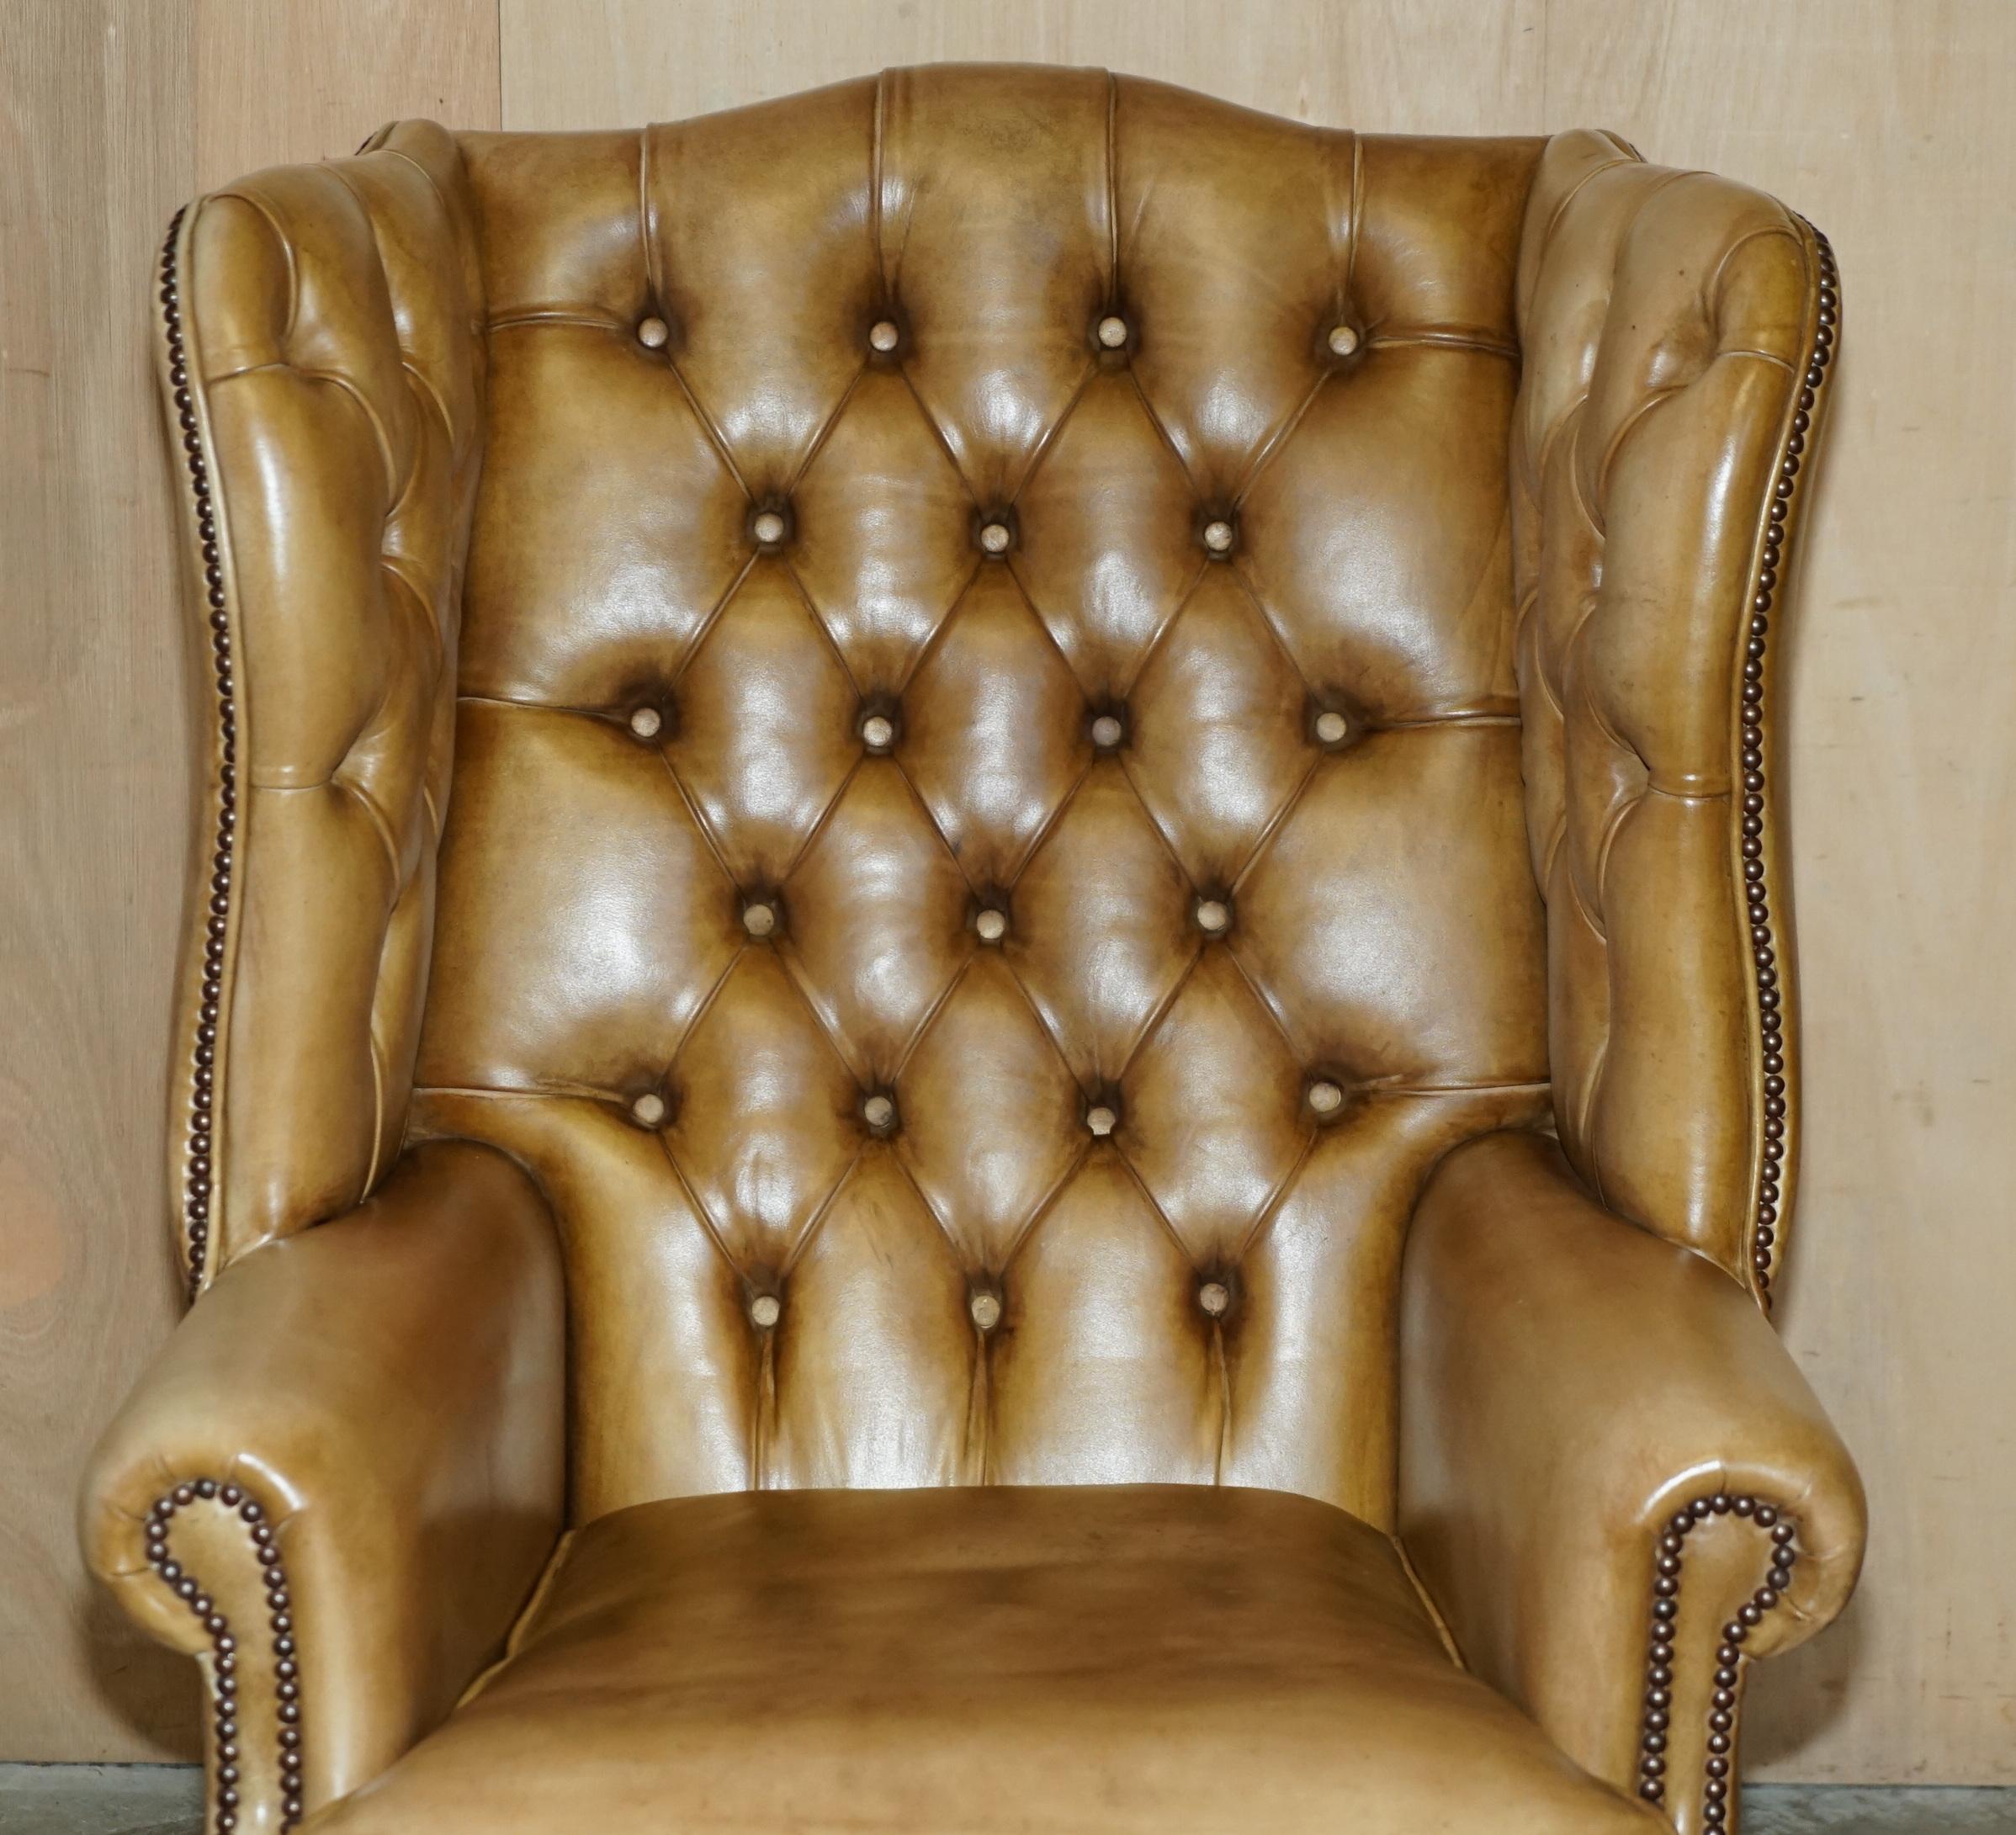 PAIR OF VINTAGE Tan BROWN LEATHER CHESTERFiELD WINGBACK CHAIRS WITH FOOTSTOOLS (Handgefertigt) im Angebot